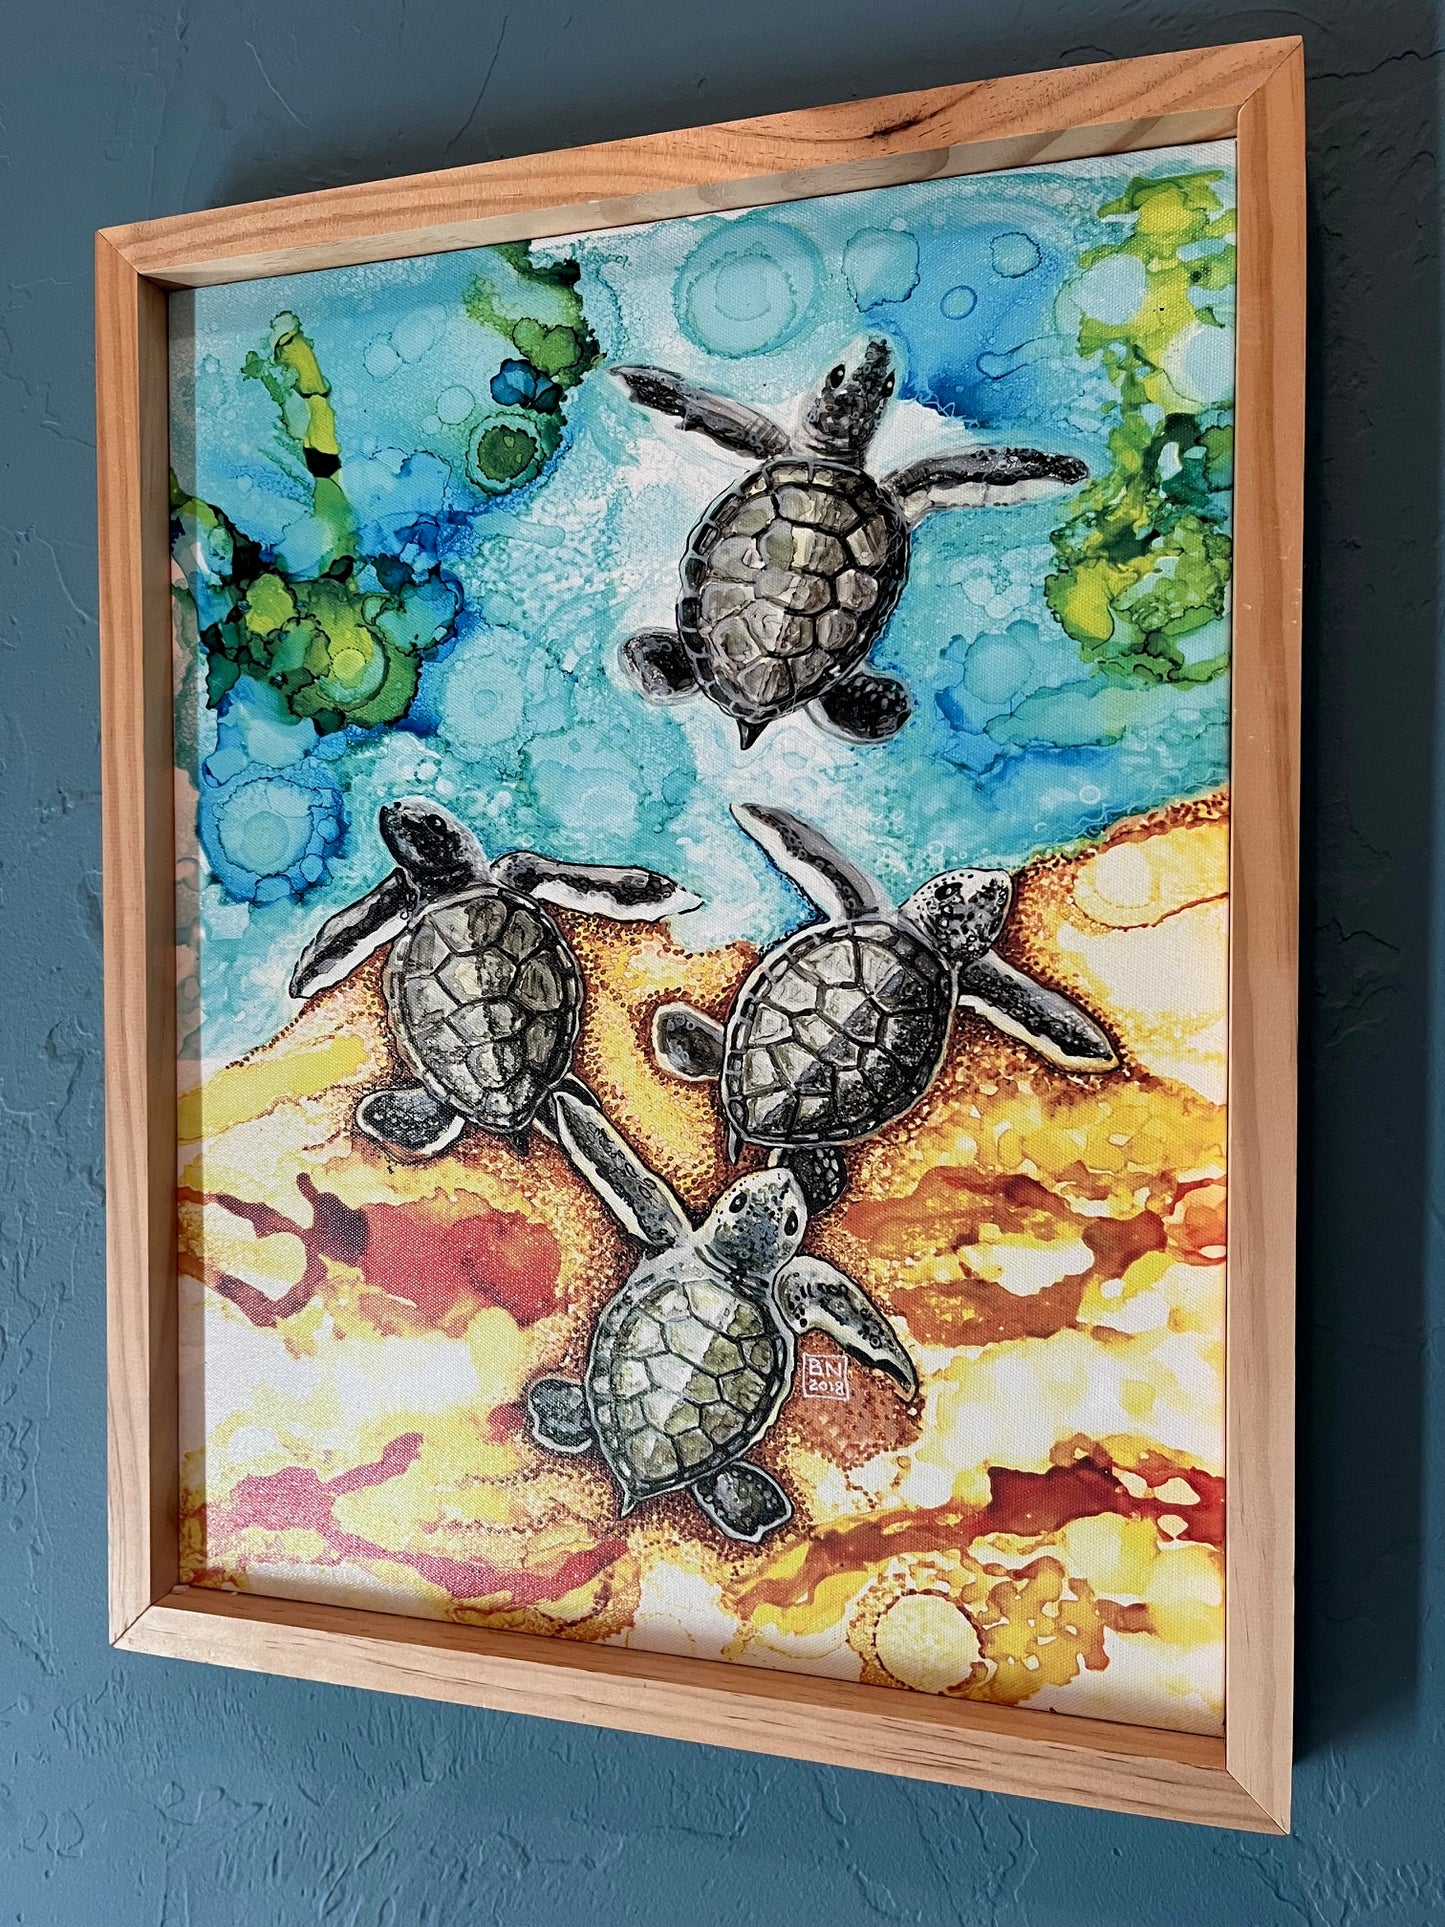 Baby Sea Turtles Entering the Ocean Can16" x 22" Baby Turtles Canvas Wood Framed Print of original alcohol ink painting by Barbara Newsome.  If you are a sea turtle fan, you will love this canvas print depicting 4 baby sea turtle hatch-lings making their way to the ocean and future. The painting was created using alcohol inks and pens. The print is framed with natural pine wood.vas. Barbara Newsome OBX Artist